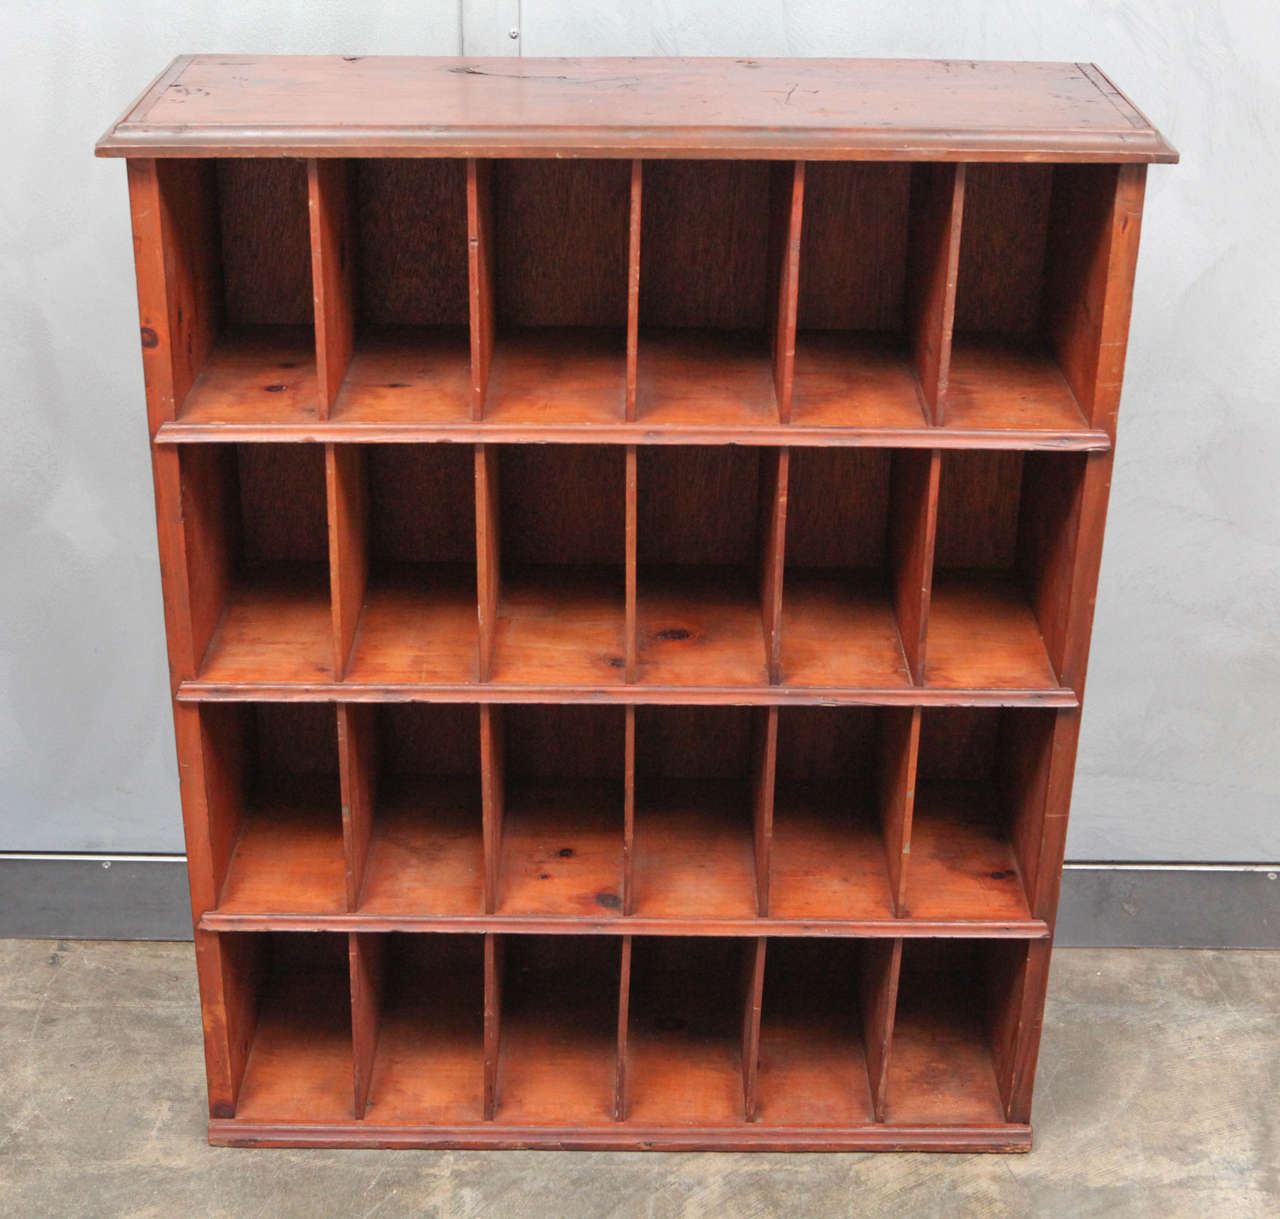 This great pine cabinet is well built and well worn with a wonderful finish in a rich golden color. The cabinets holds 24 separate cubbies that could have been used in a post office or a hotel lobby. This piece is ready for a variety of creative and